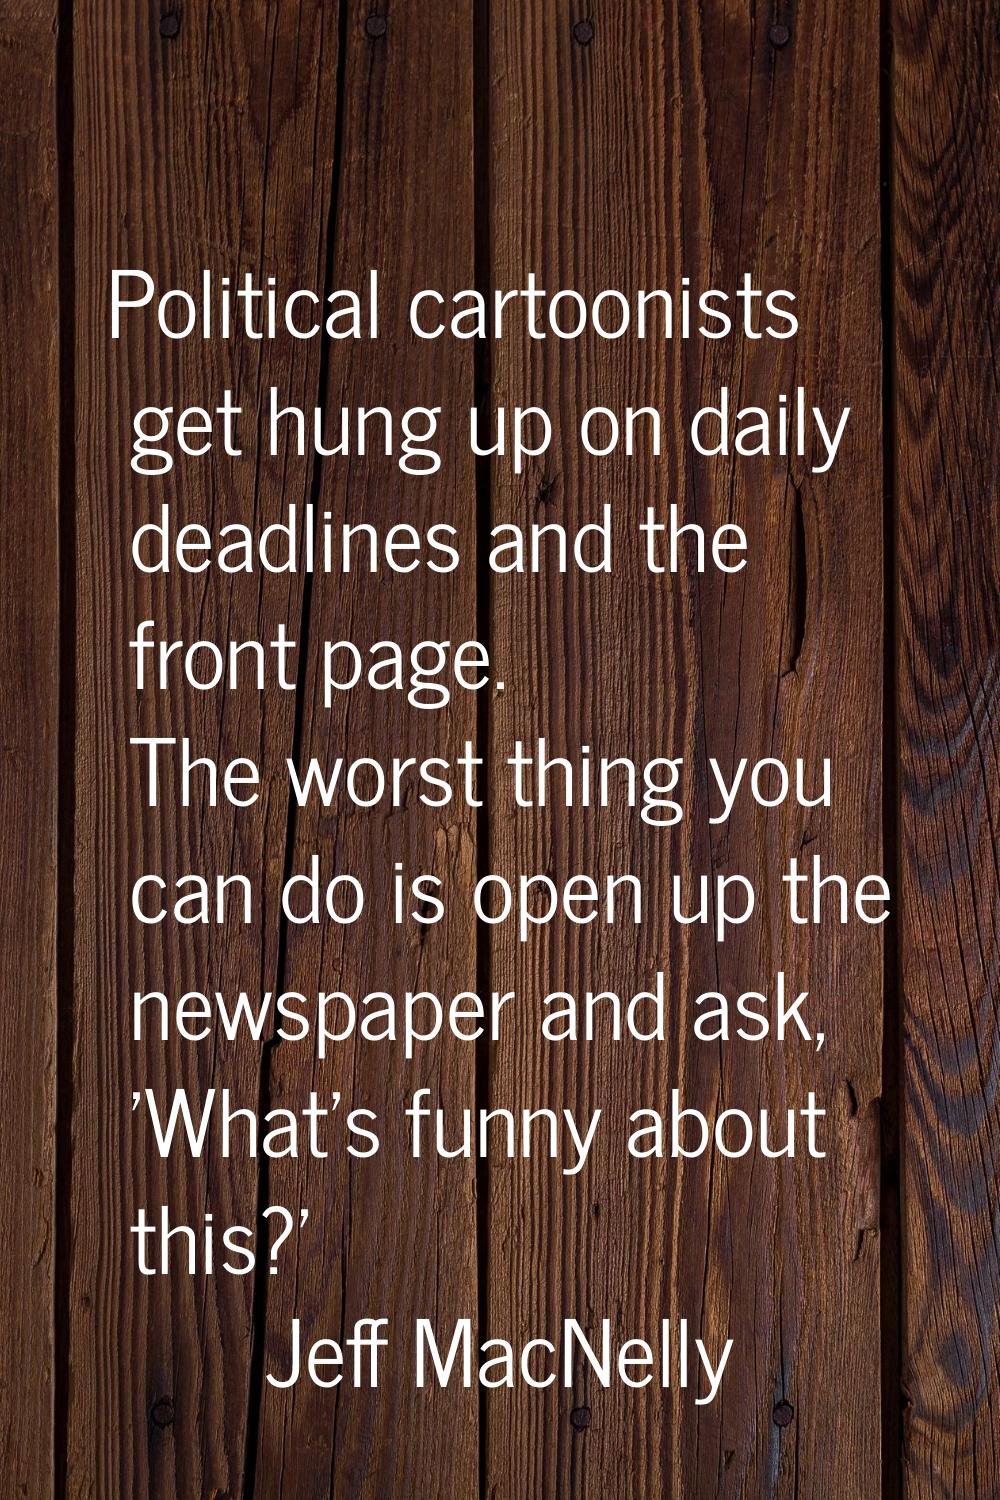 Political cartoonists get hung up on daily deadlines and the front page. The worst thing you can do